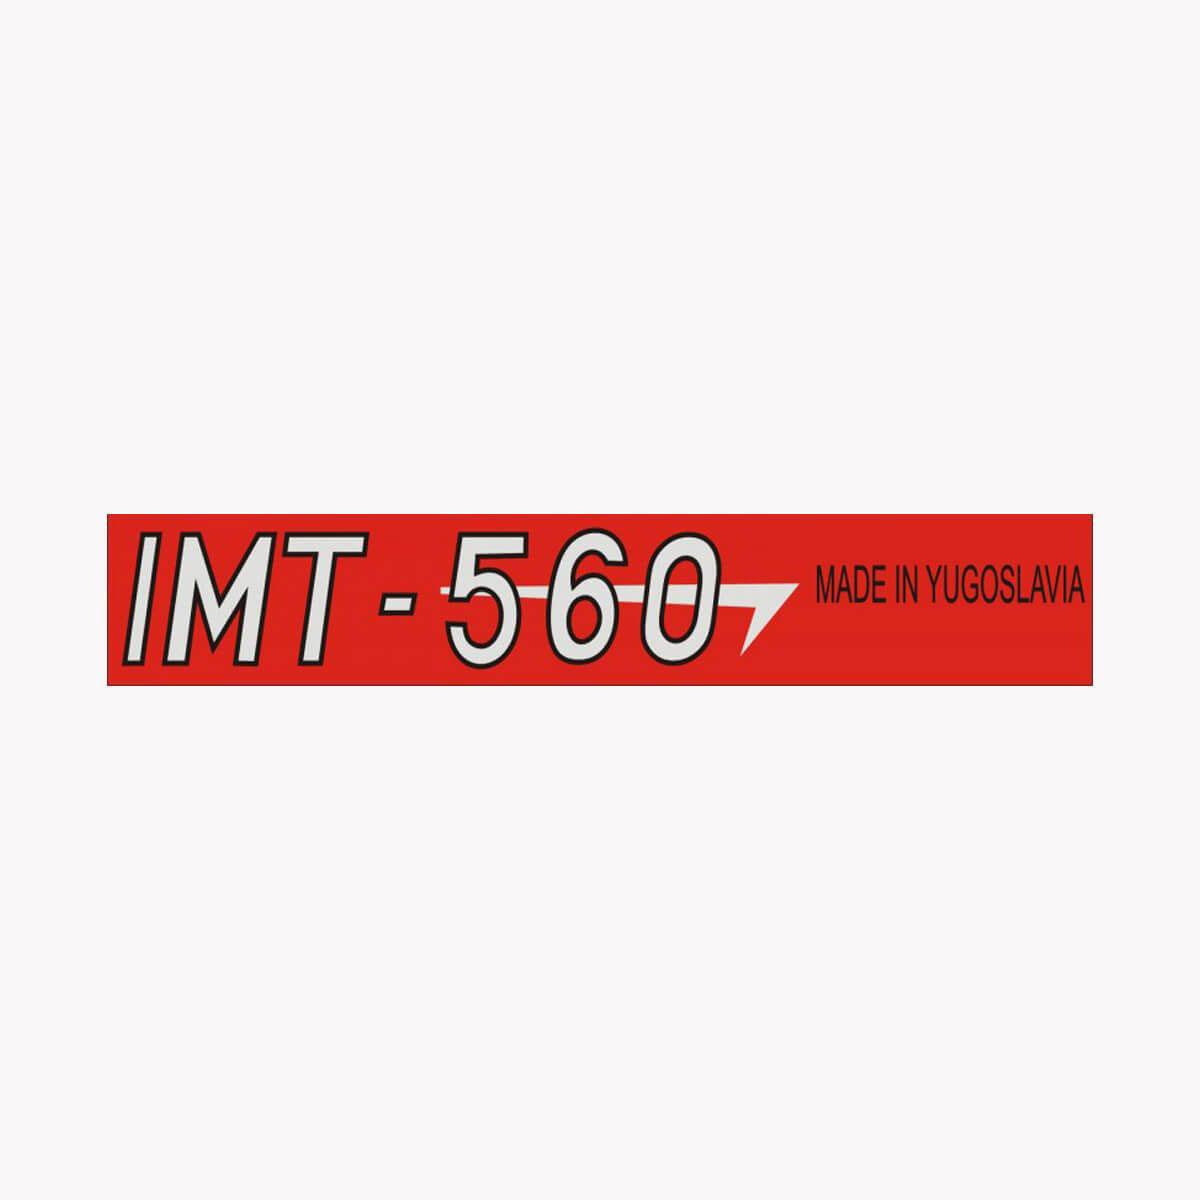 Selected image for CAR 888 ACCESSORIES Nalepnica "Imt 560" velika crvena